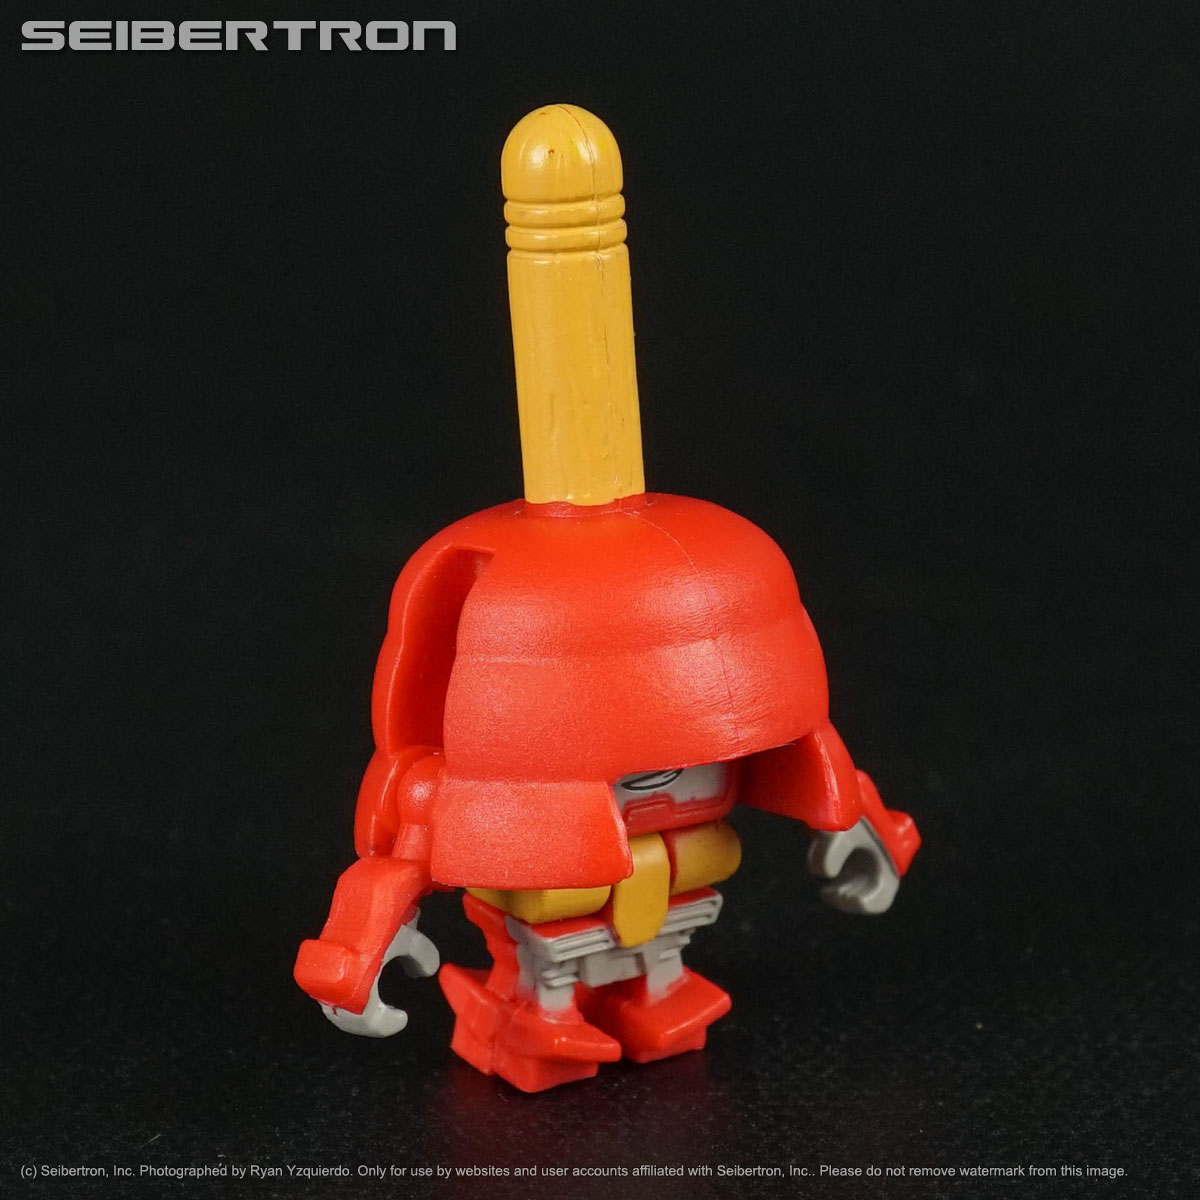 CLOGSTOPPER Transformers BotBots Series 1 LOST BOTS 2018 Hasbro plunger